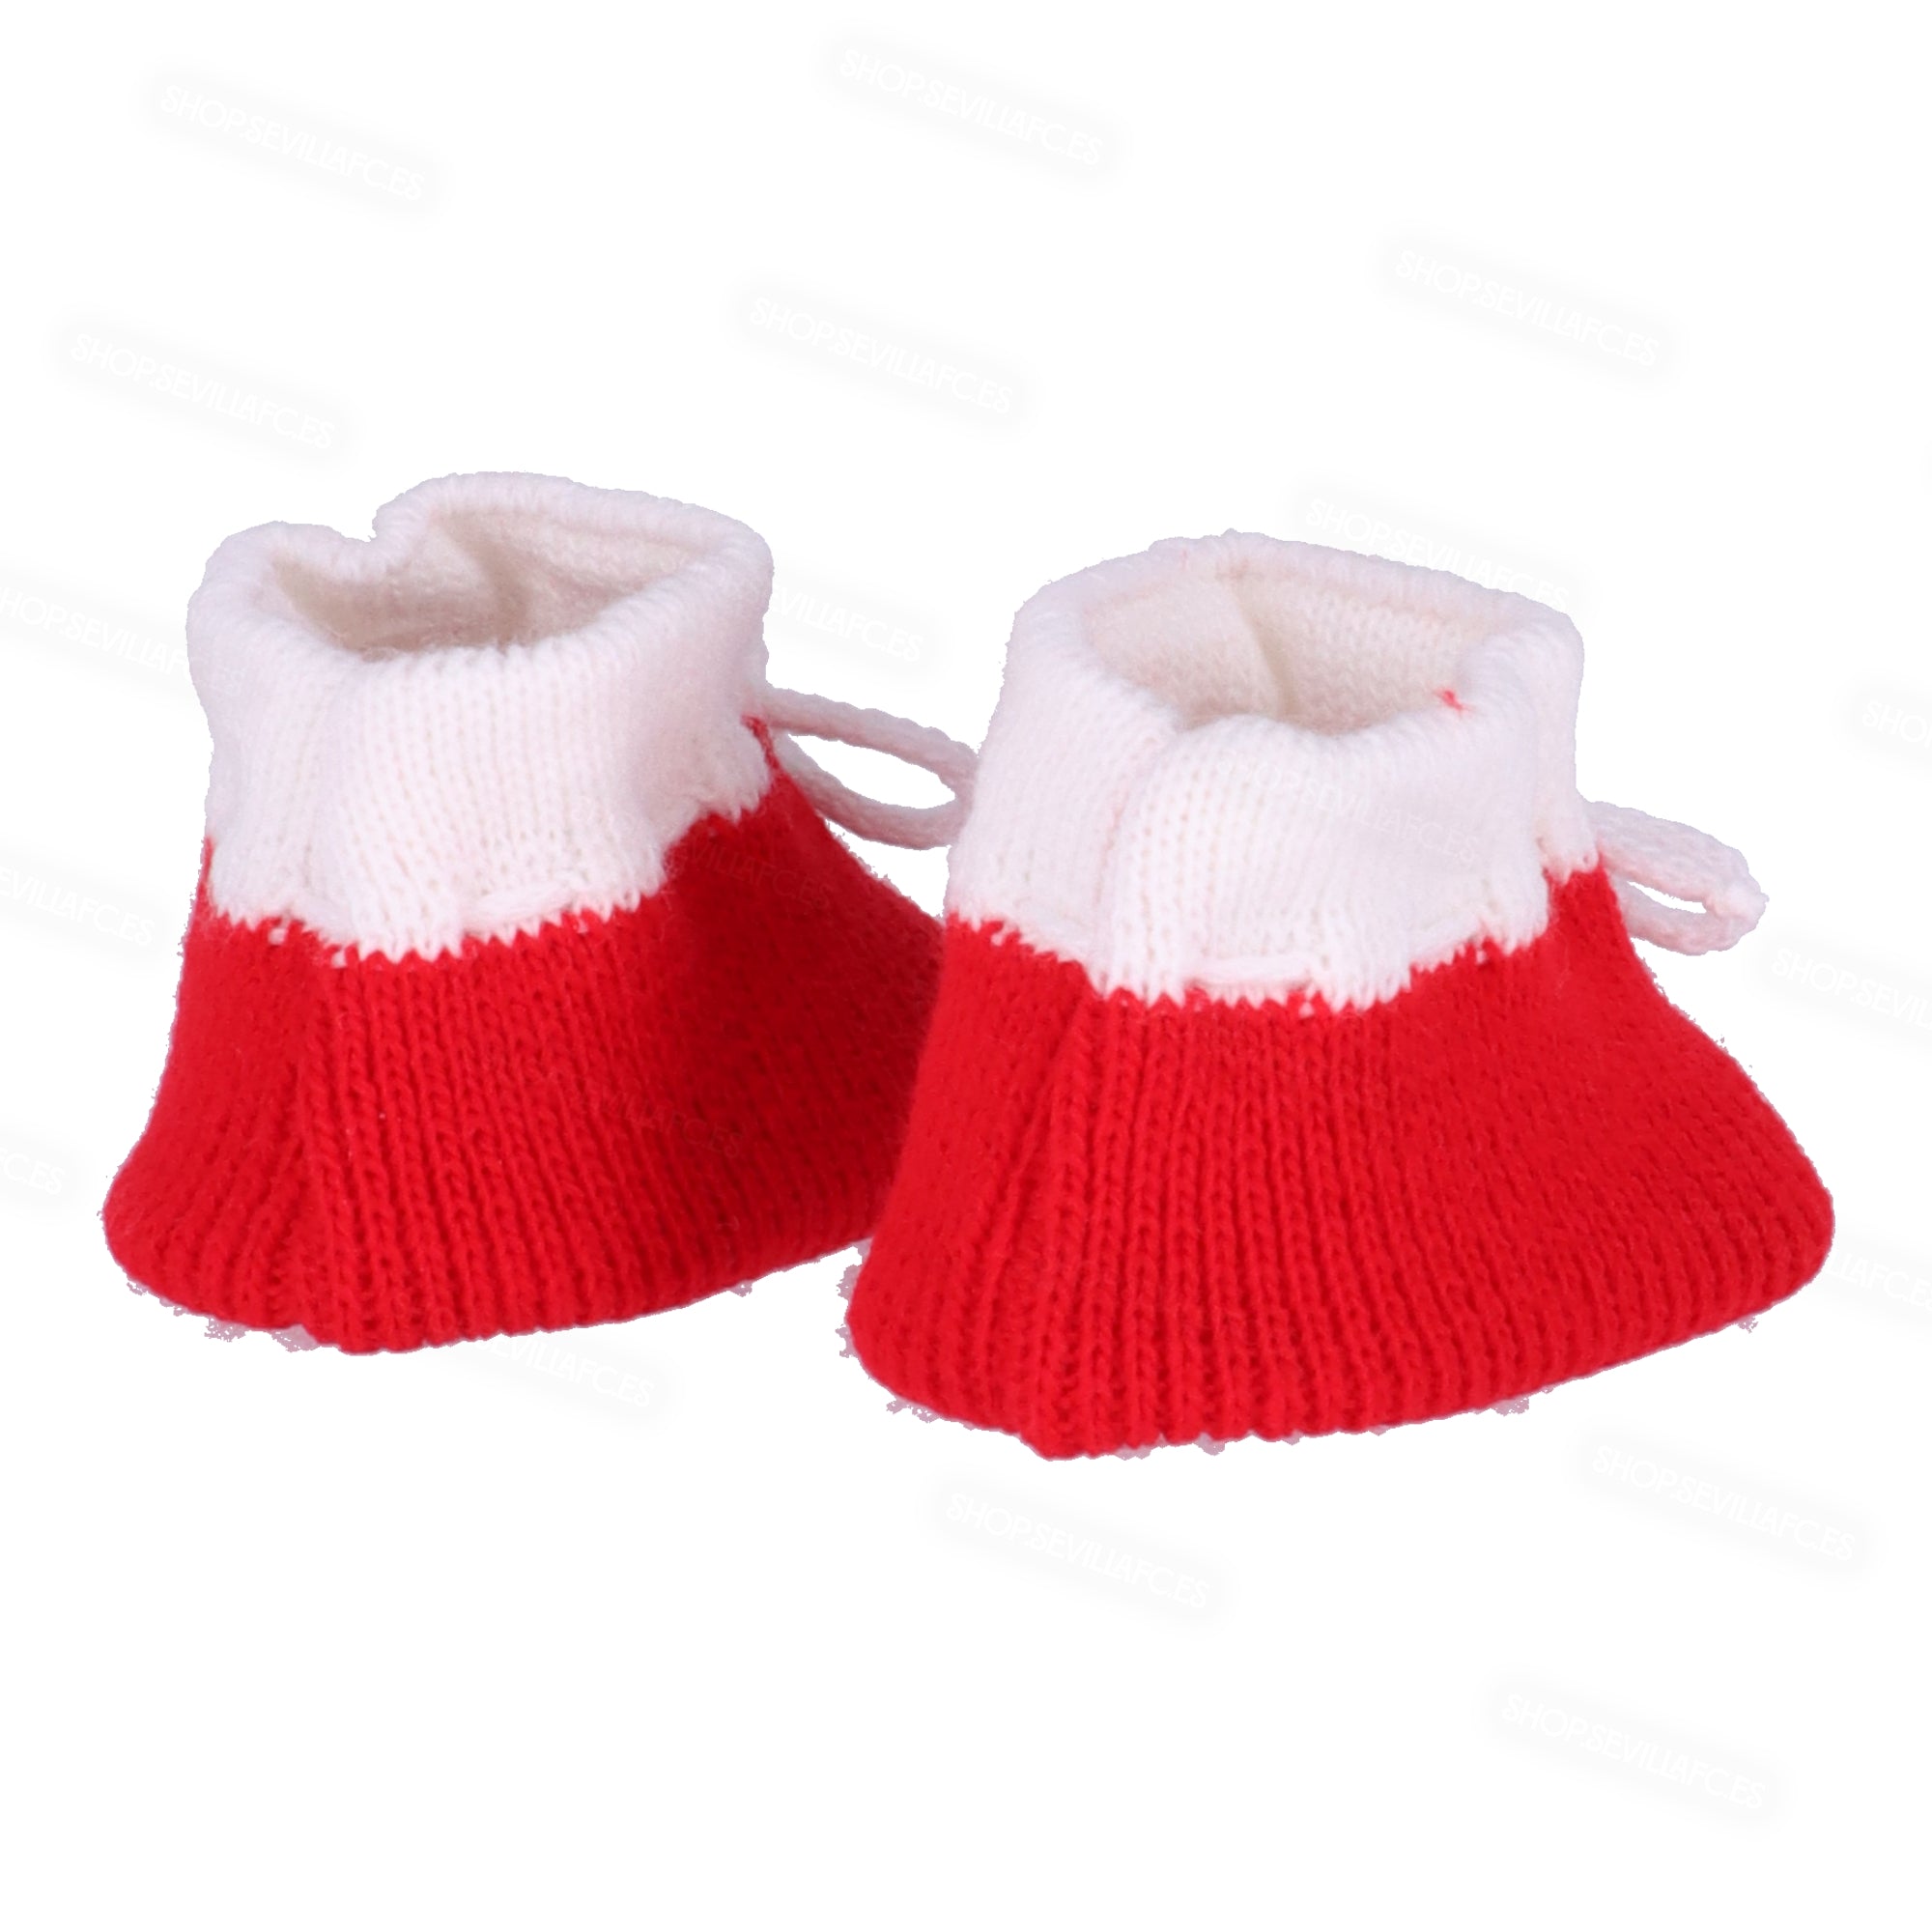 Red baby booties